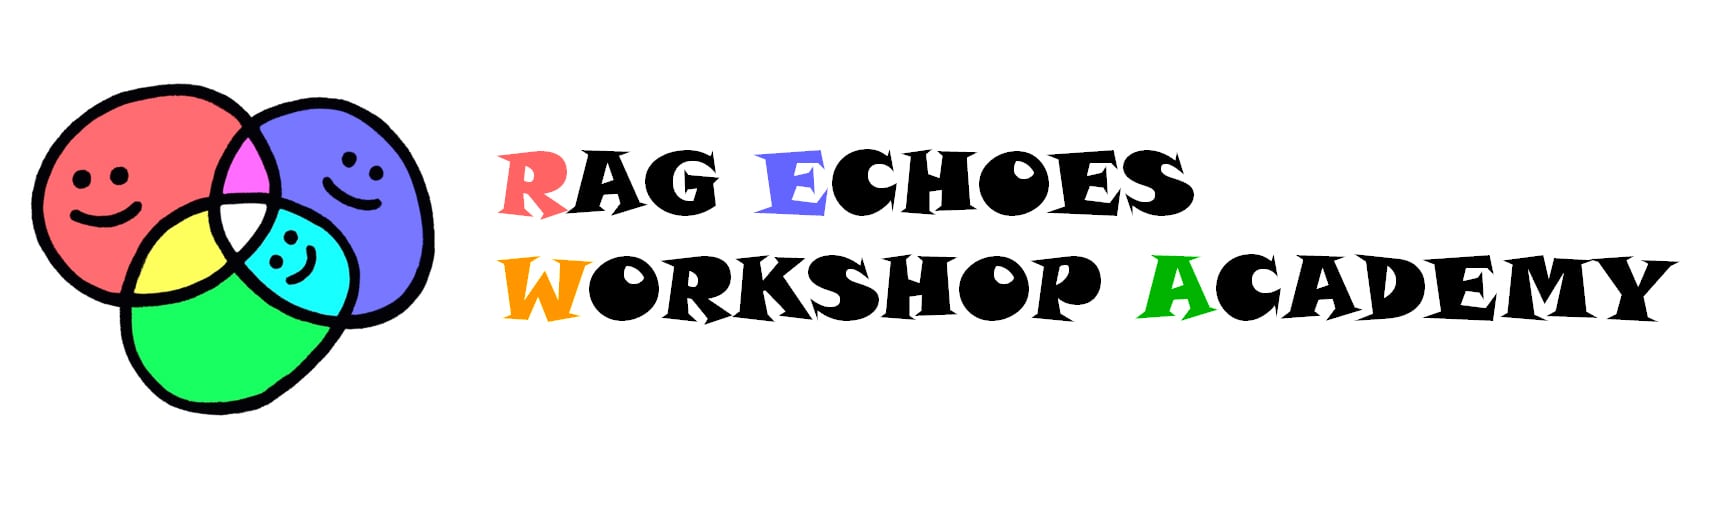 RAG ECHOES ONLINE STORE